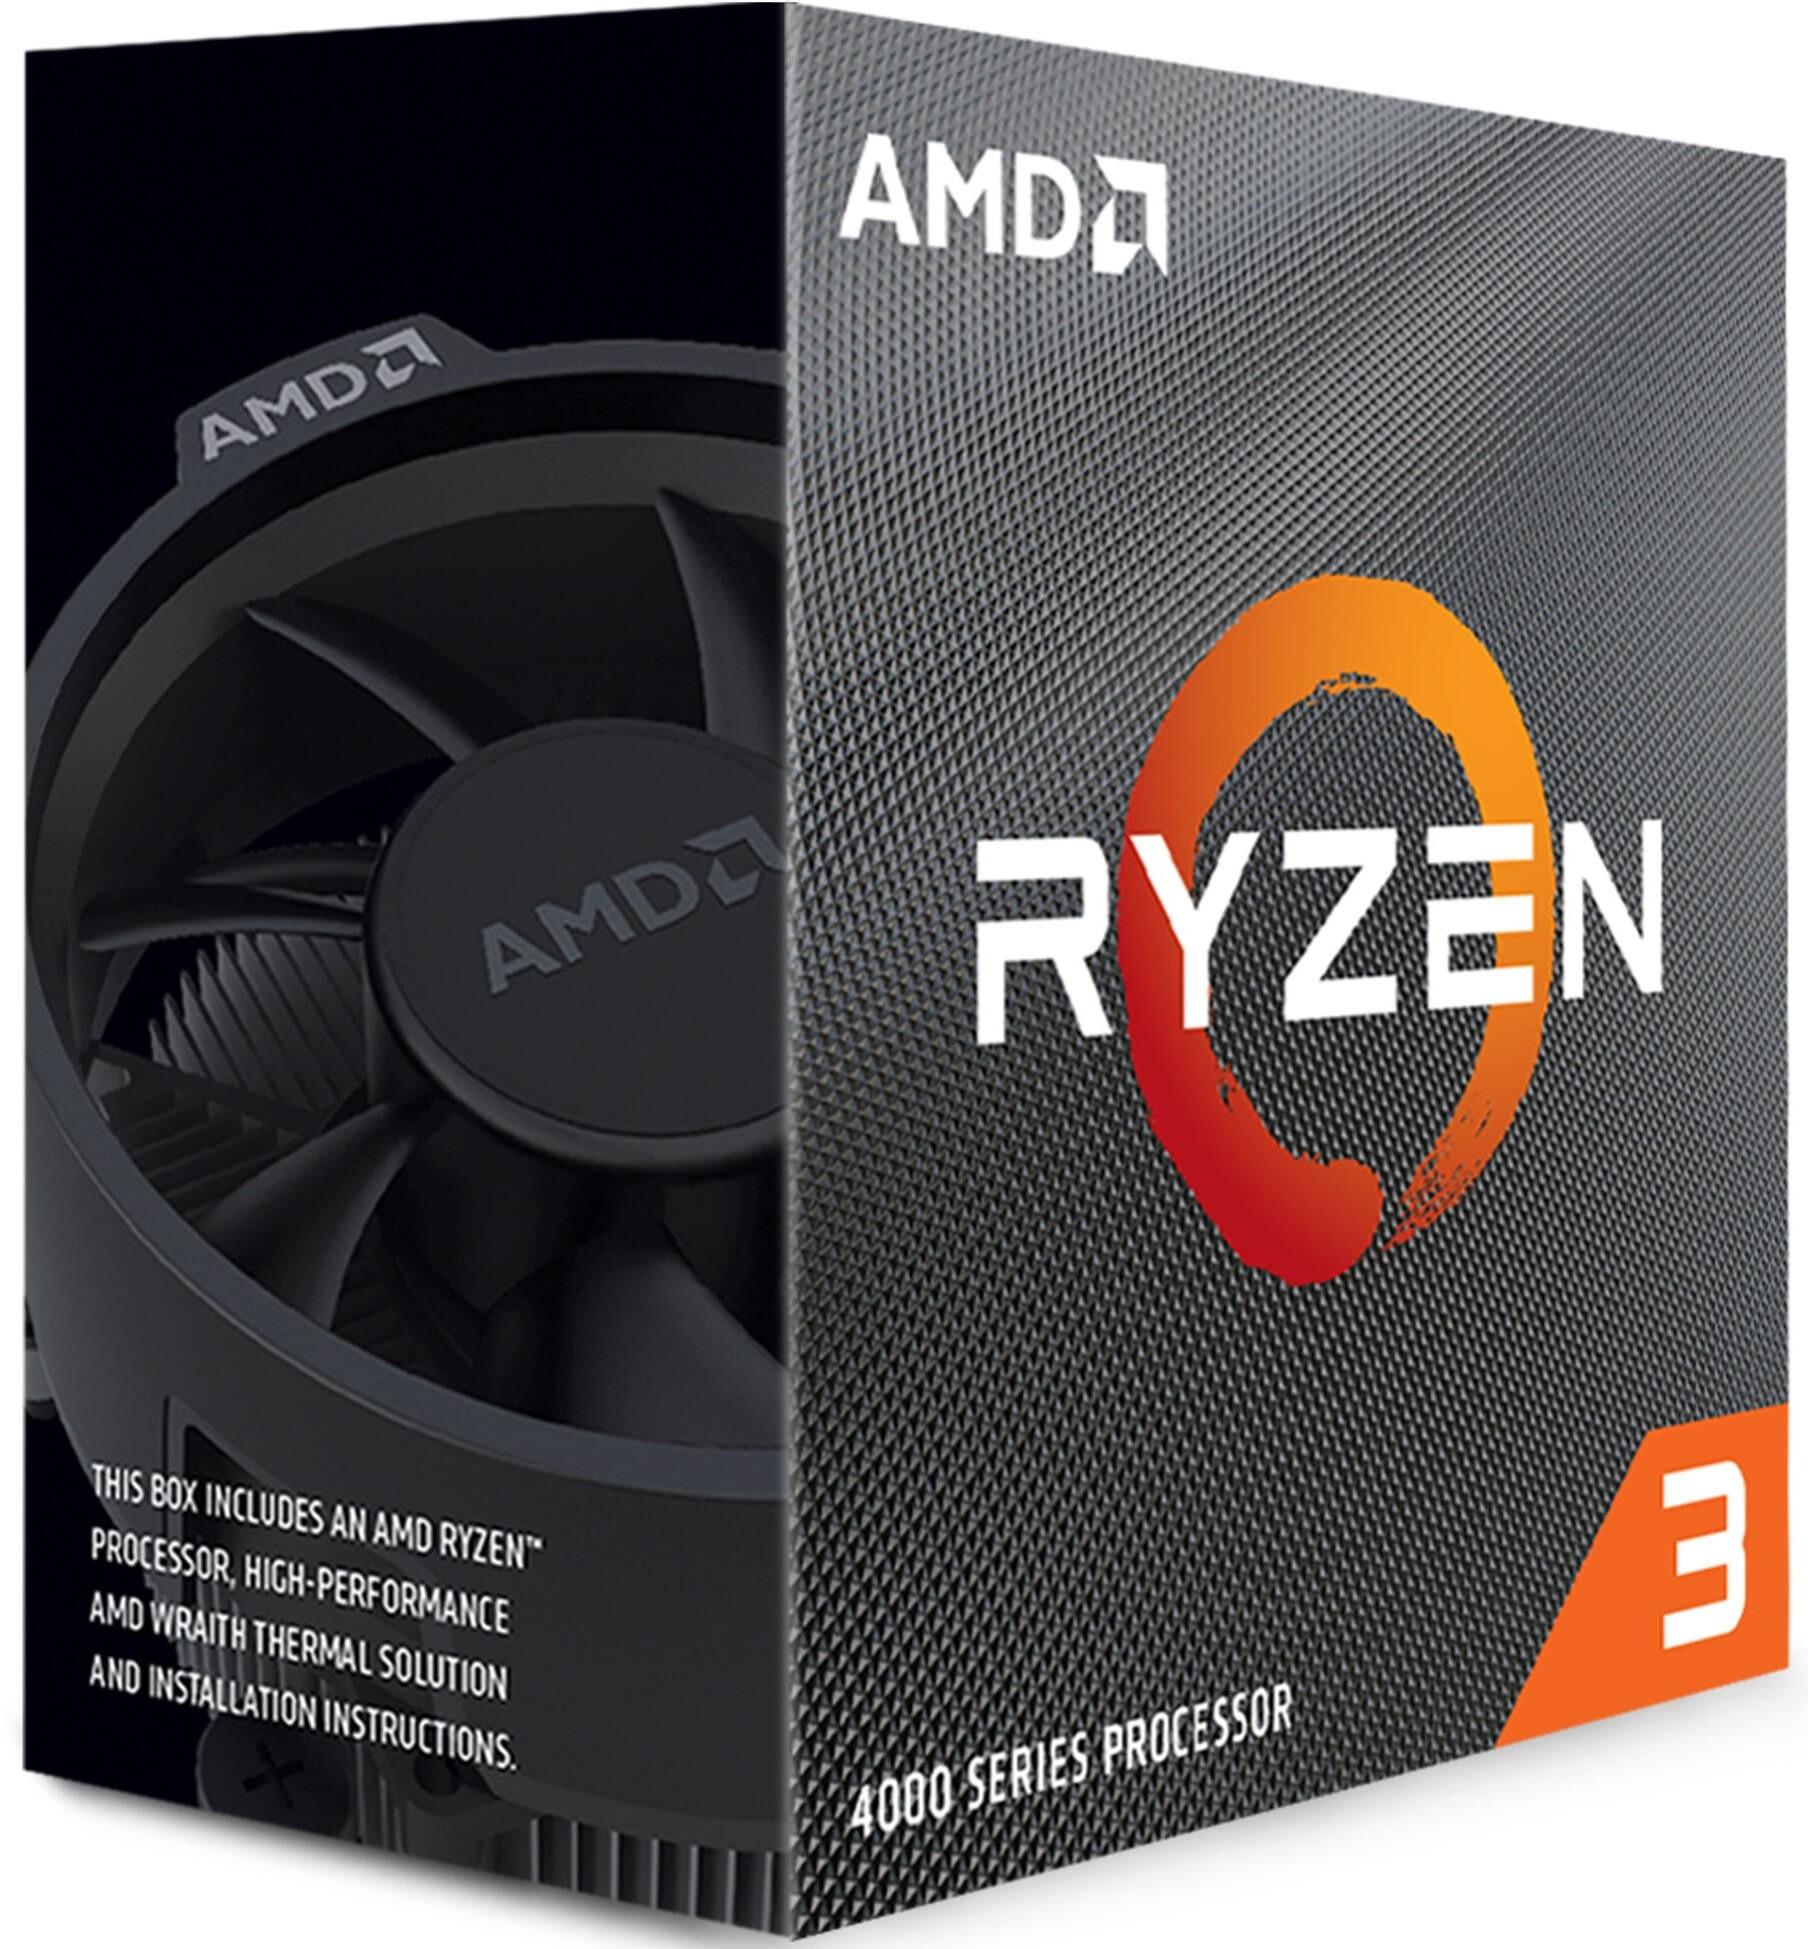 Процесор AMD Ryzen 3 4100, AM4 Socket, 4 Cores, 8 Threads, 3.8GHz(Up to 4.0GHz), 6MB Cache, 65W, BOX